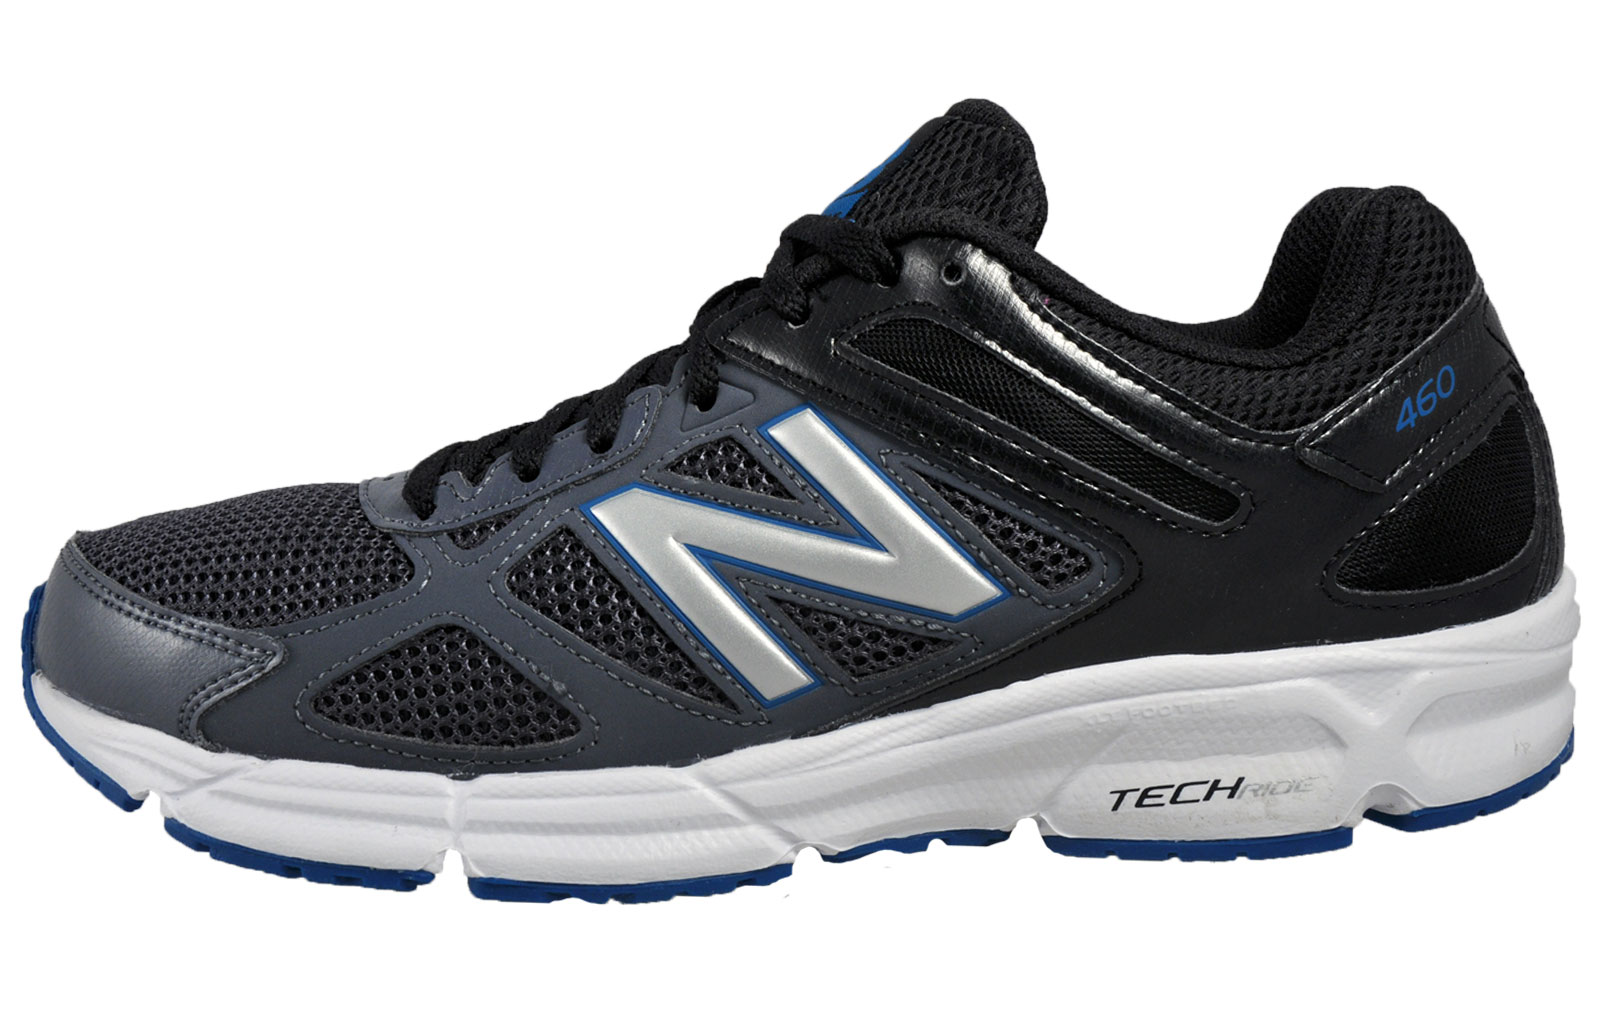 How To Check Your Amazon Gift Card Balance: New Balance Gym Shoes